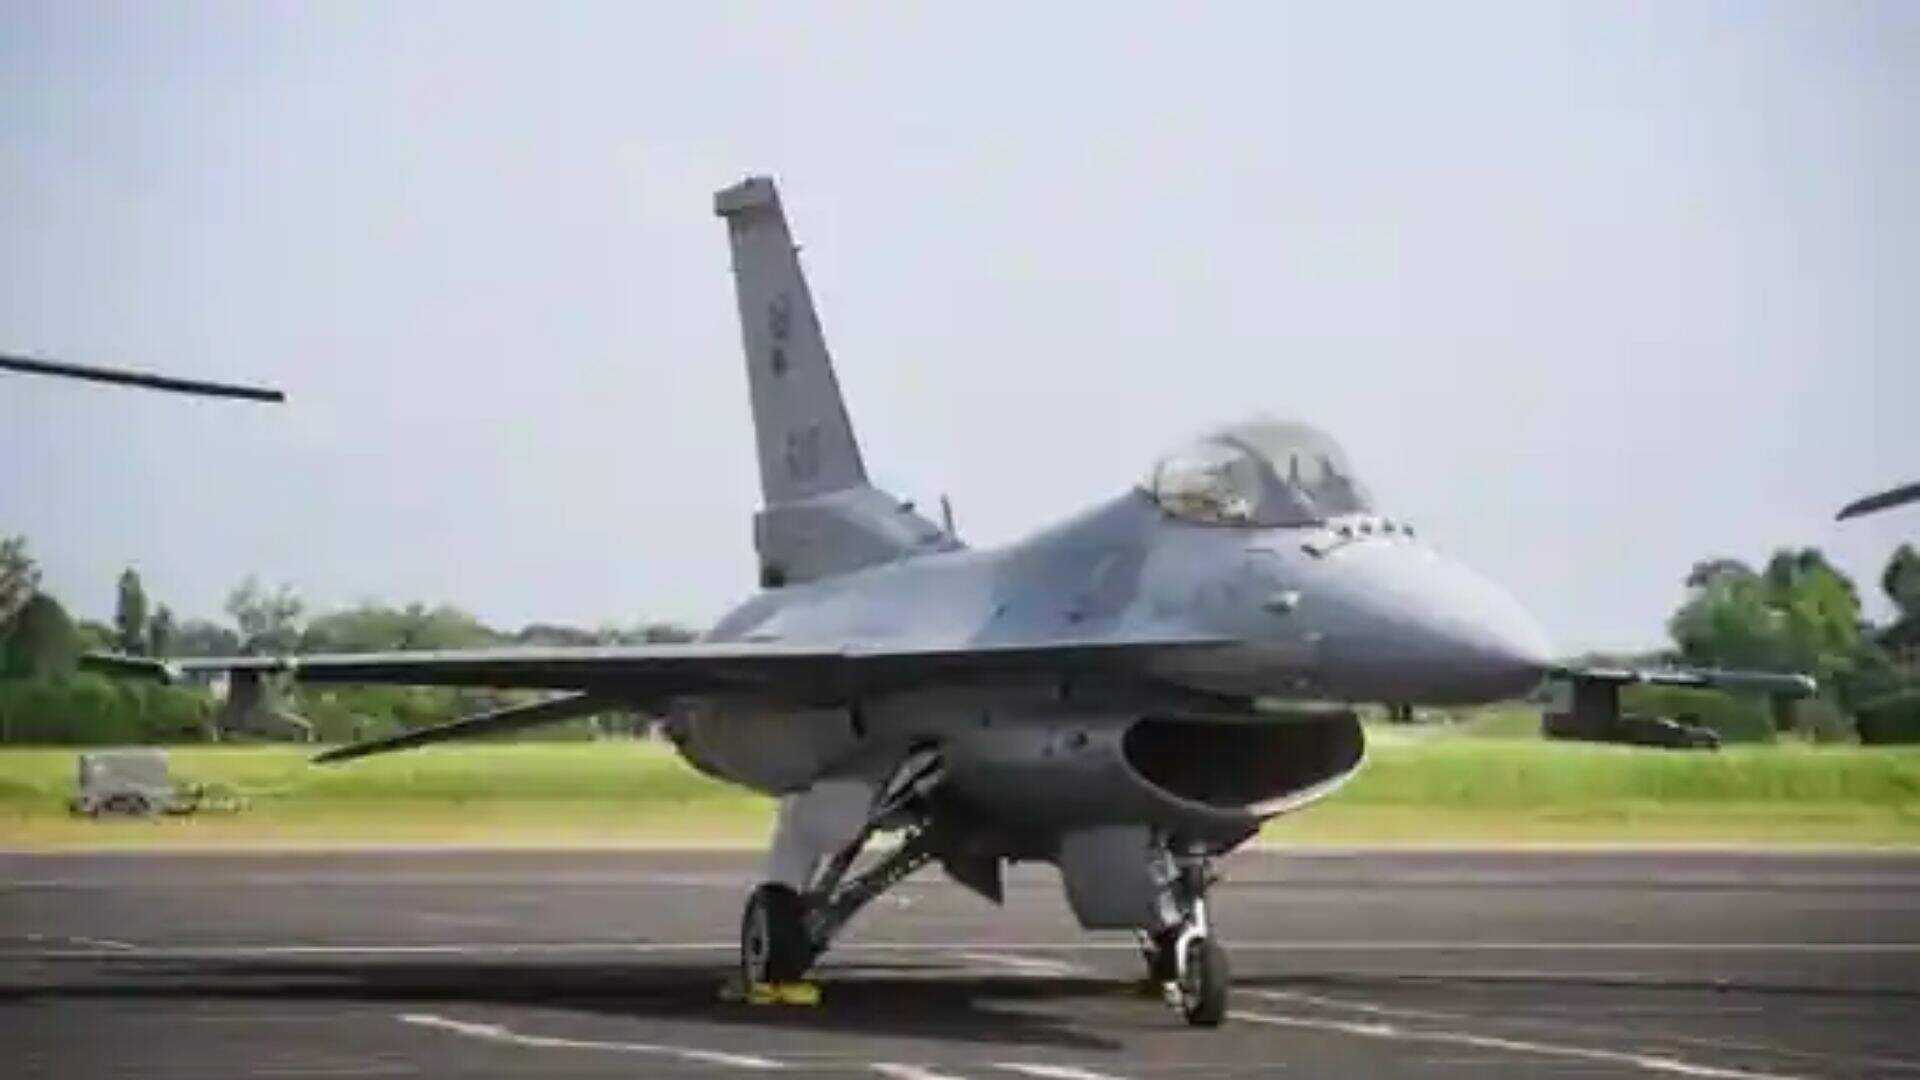 Singapore: Air Force F-16 Crashed At Air Base On Wednesday